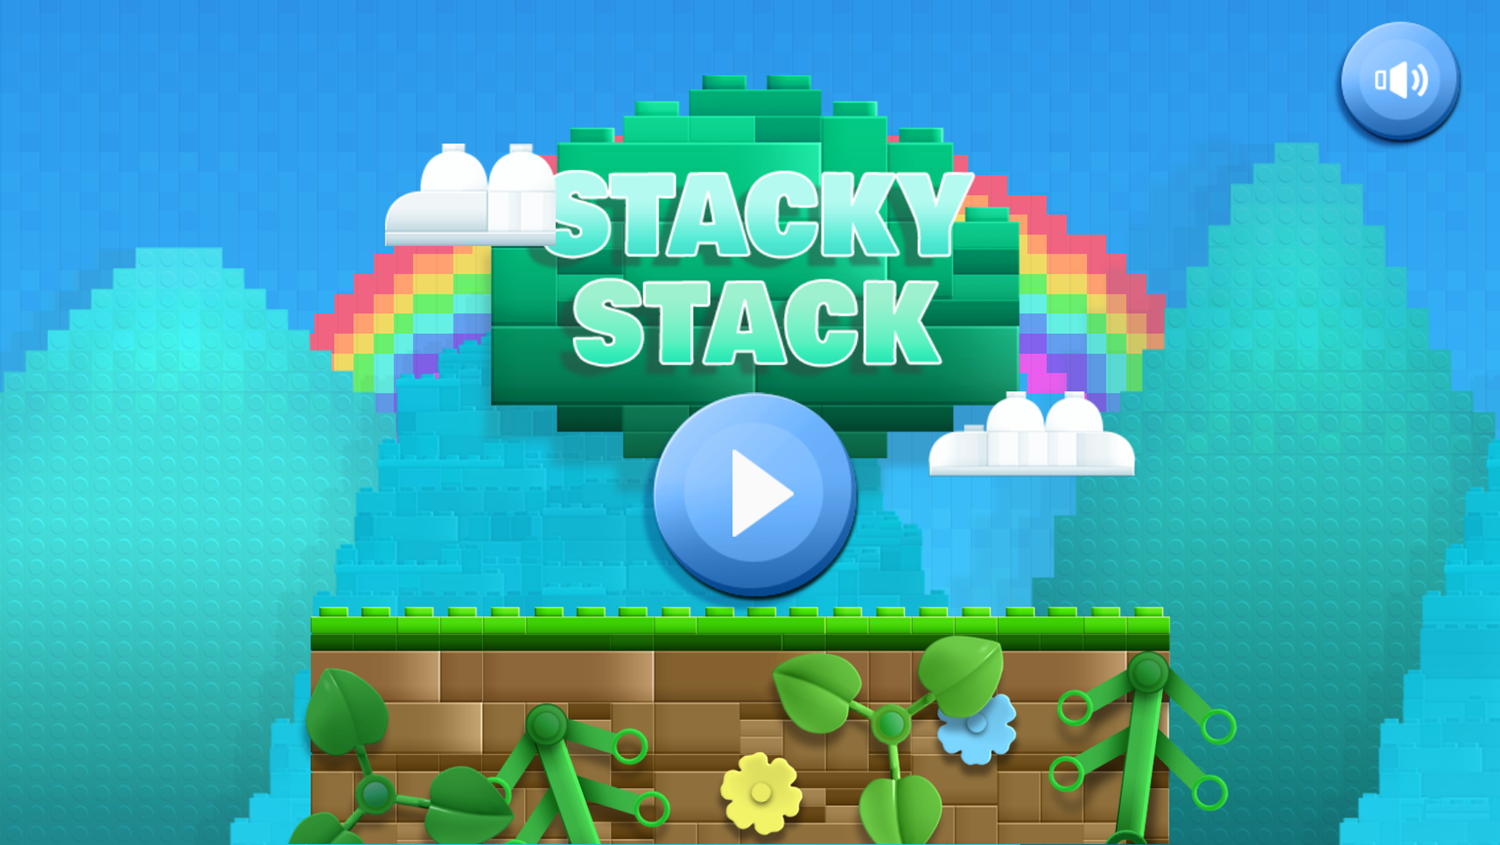 Stacky Stack Game Welcome Screen Screenshot.